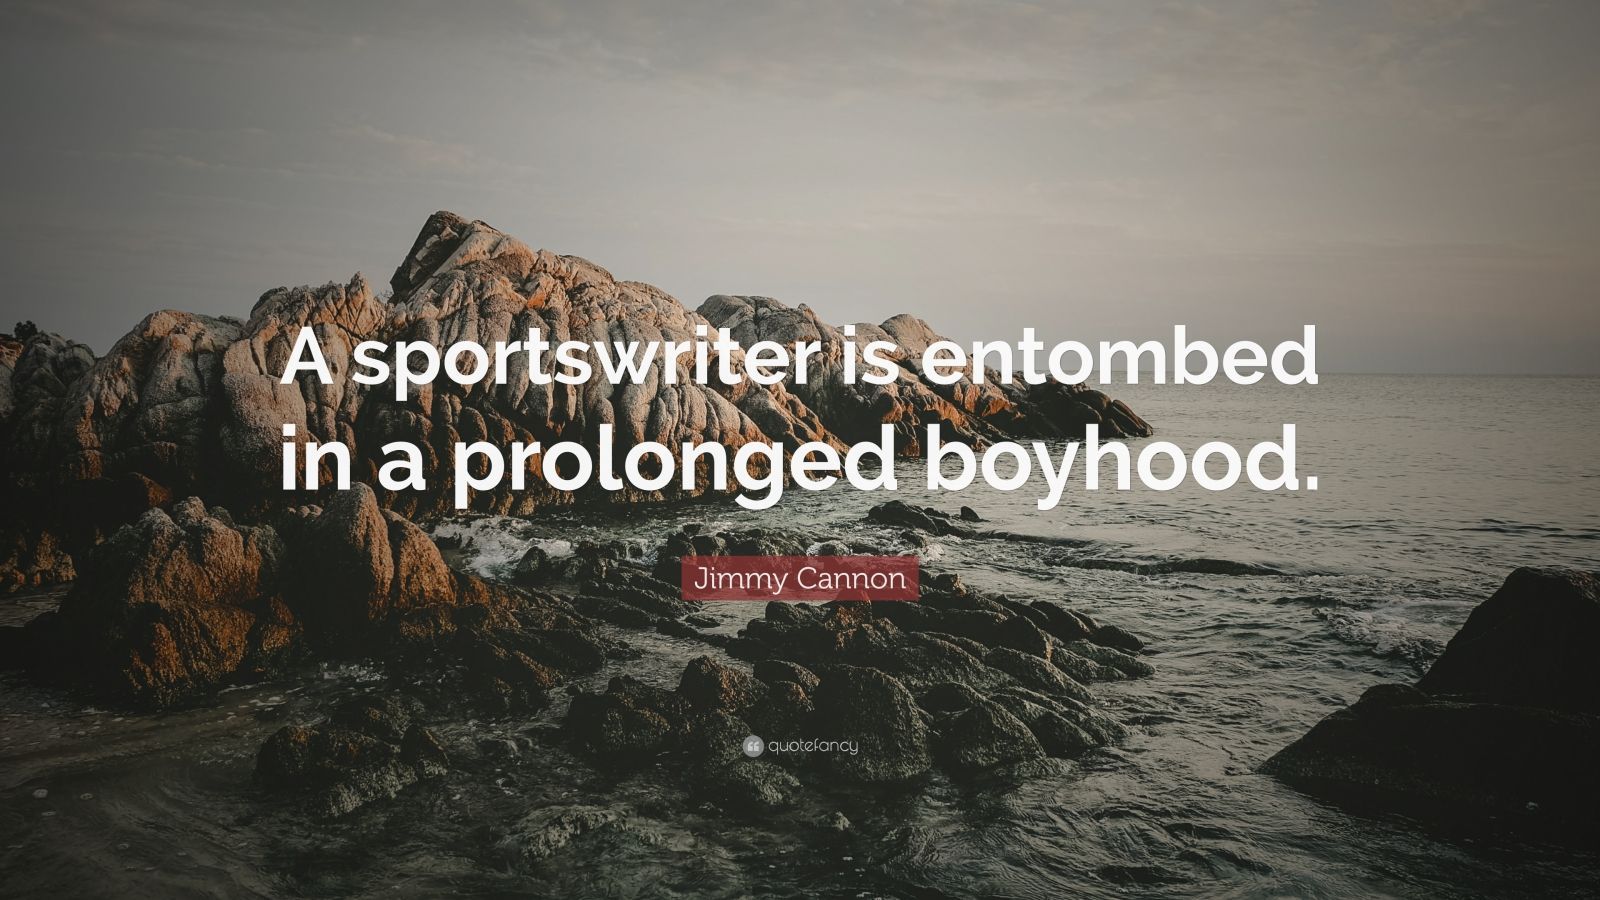 Jimmy Cannon Quote: “A sportswriter is entombed in a prolonged